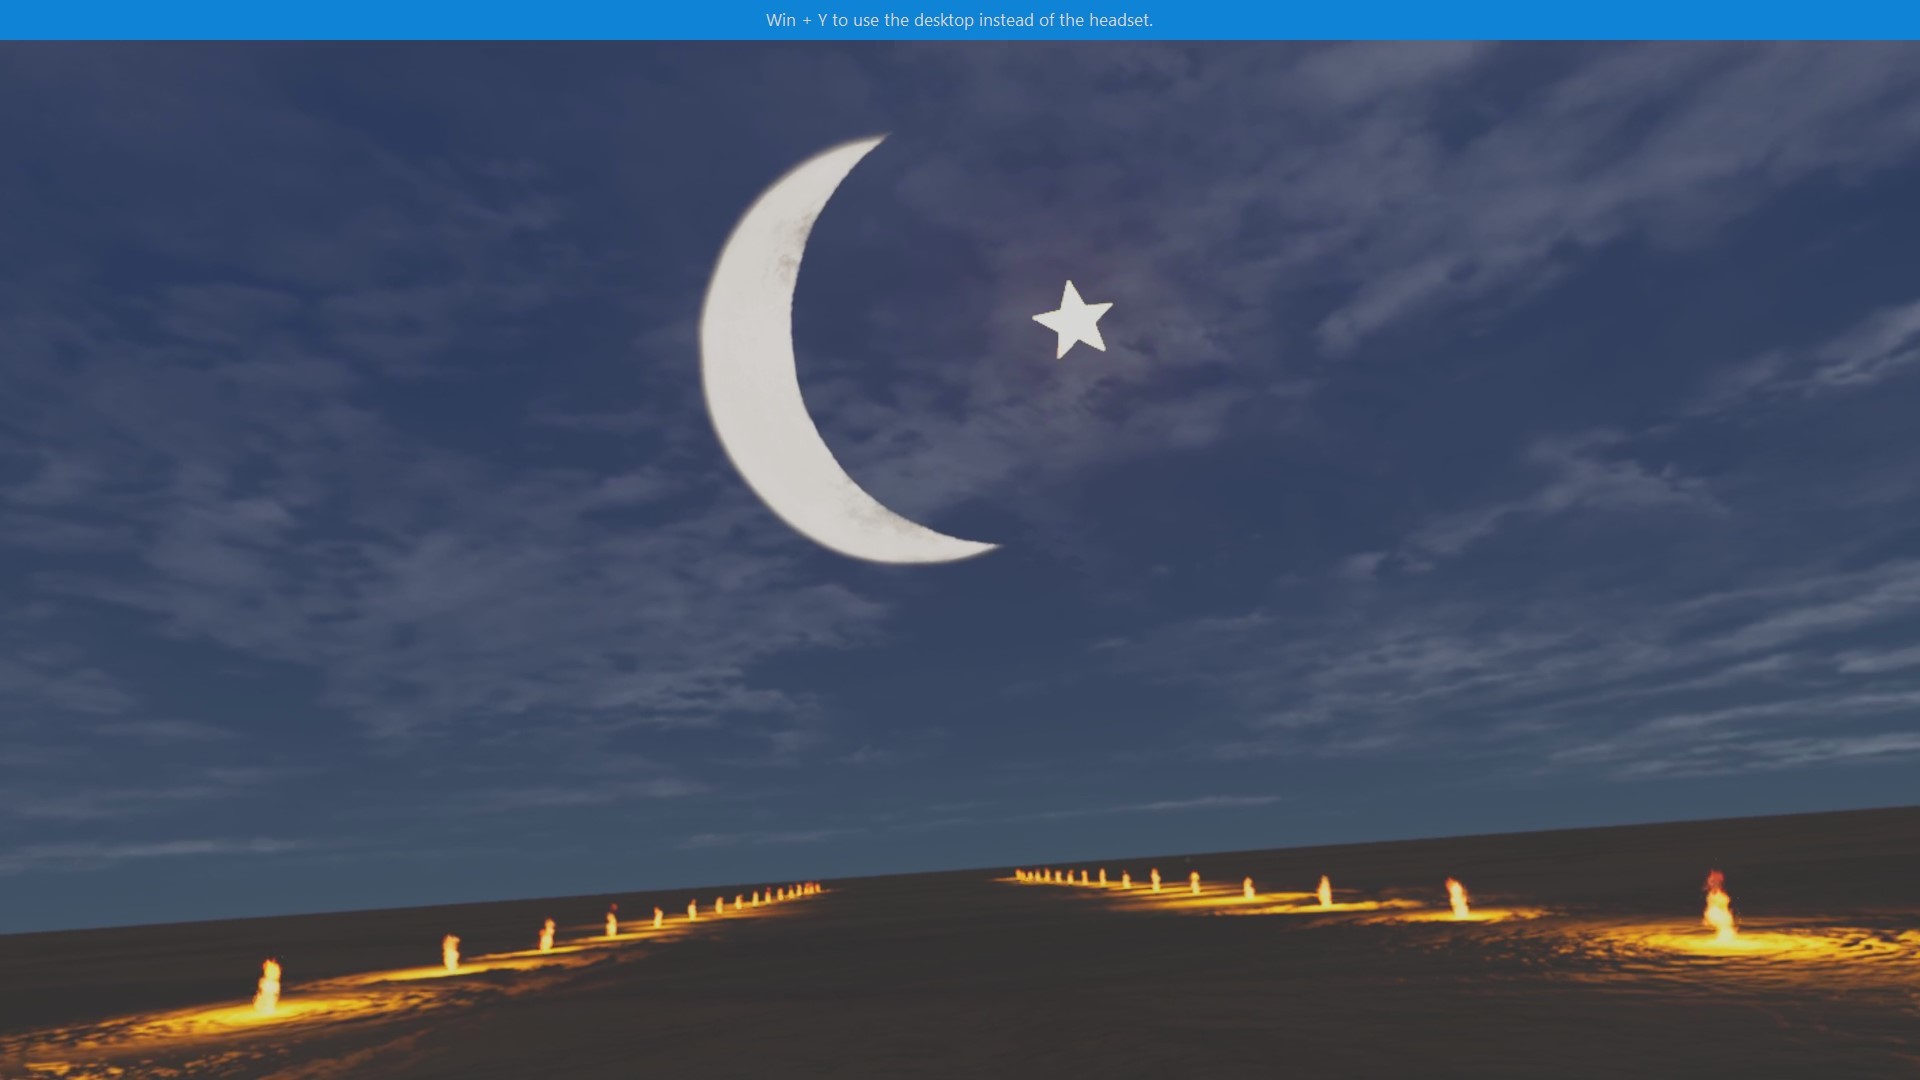 HOLY QURAN VR EXPERİENCE Free Download